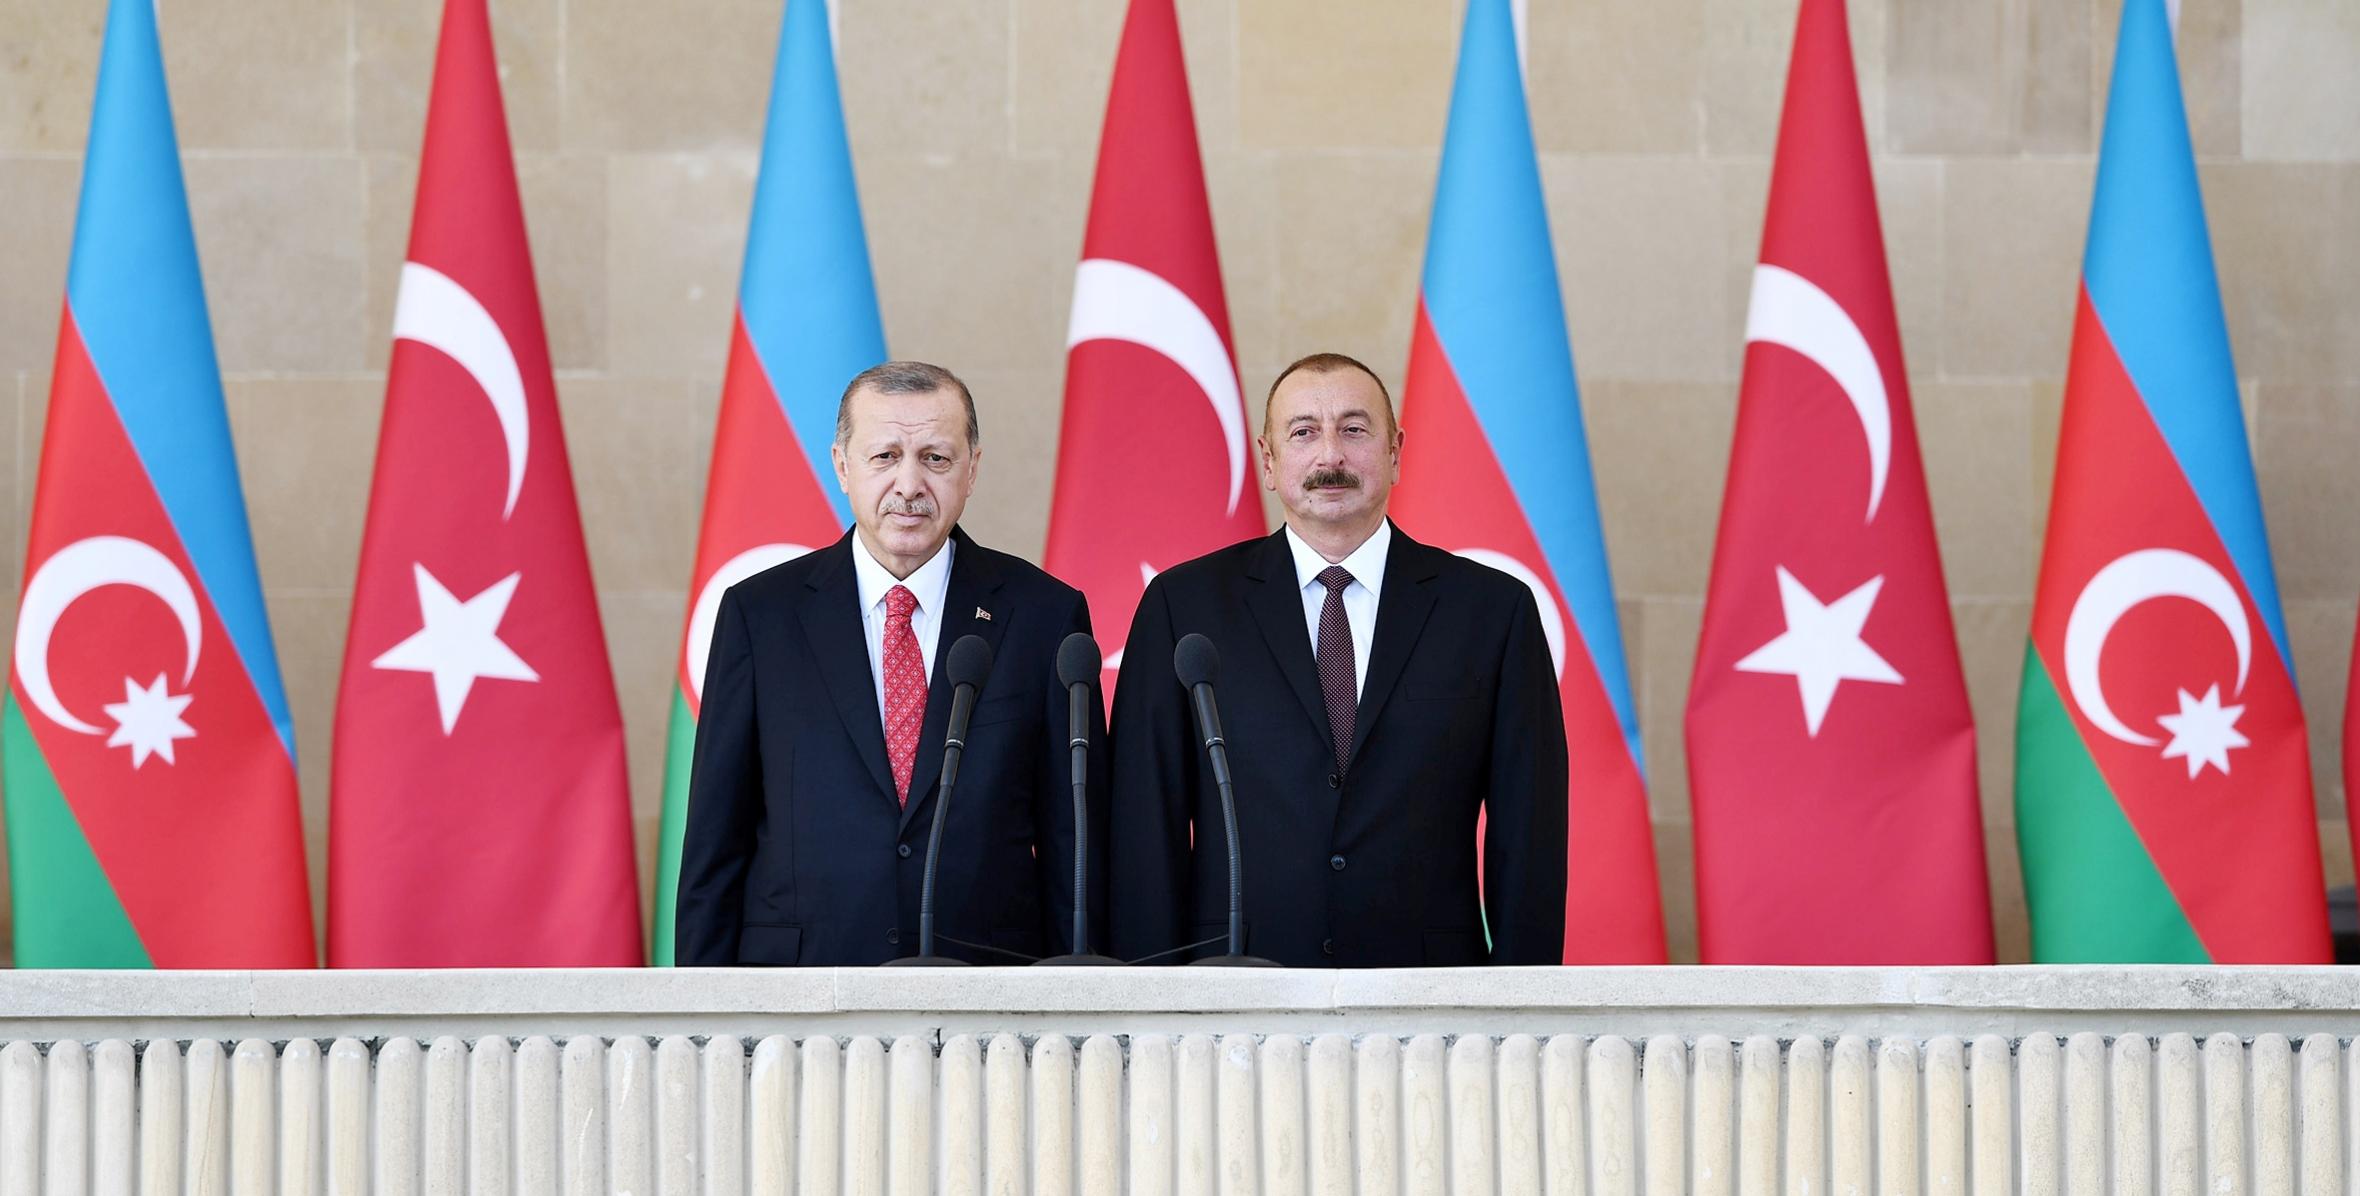 Ilham Aliyev and  Recep Tayyip Erdogan attended the parade dedicated to 100th anniversary of liberation of Baku